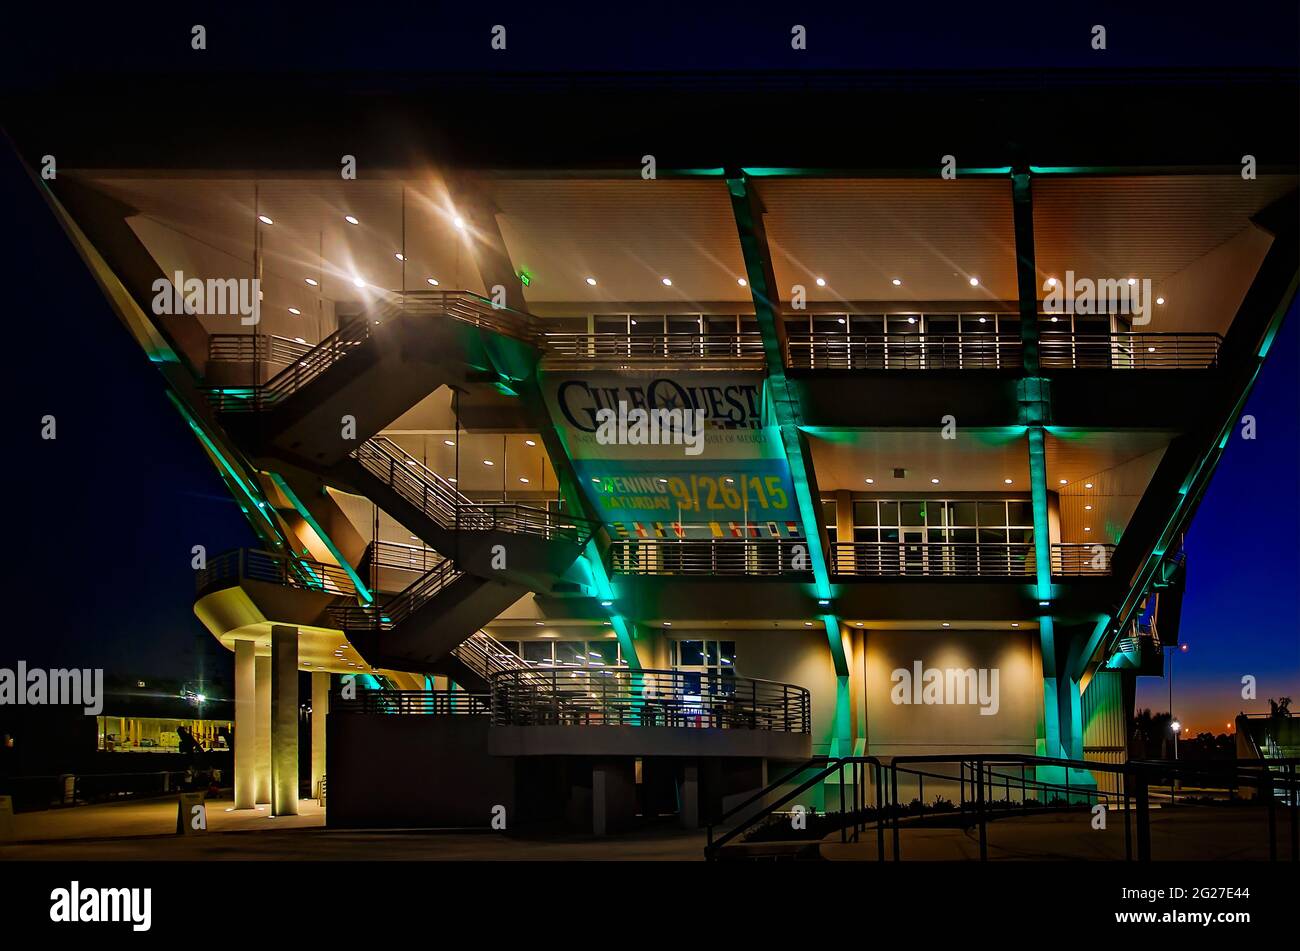 GulfQuest Museum is pictured at night, Nov. 27, 2015, in Mobile, Alabama. The interactive maritime museum opened in 2015 on the waterfront. Stock Photo